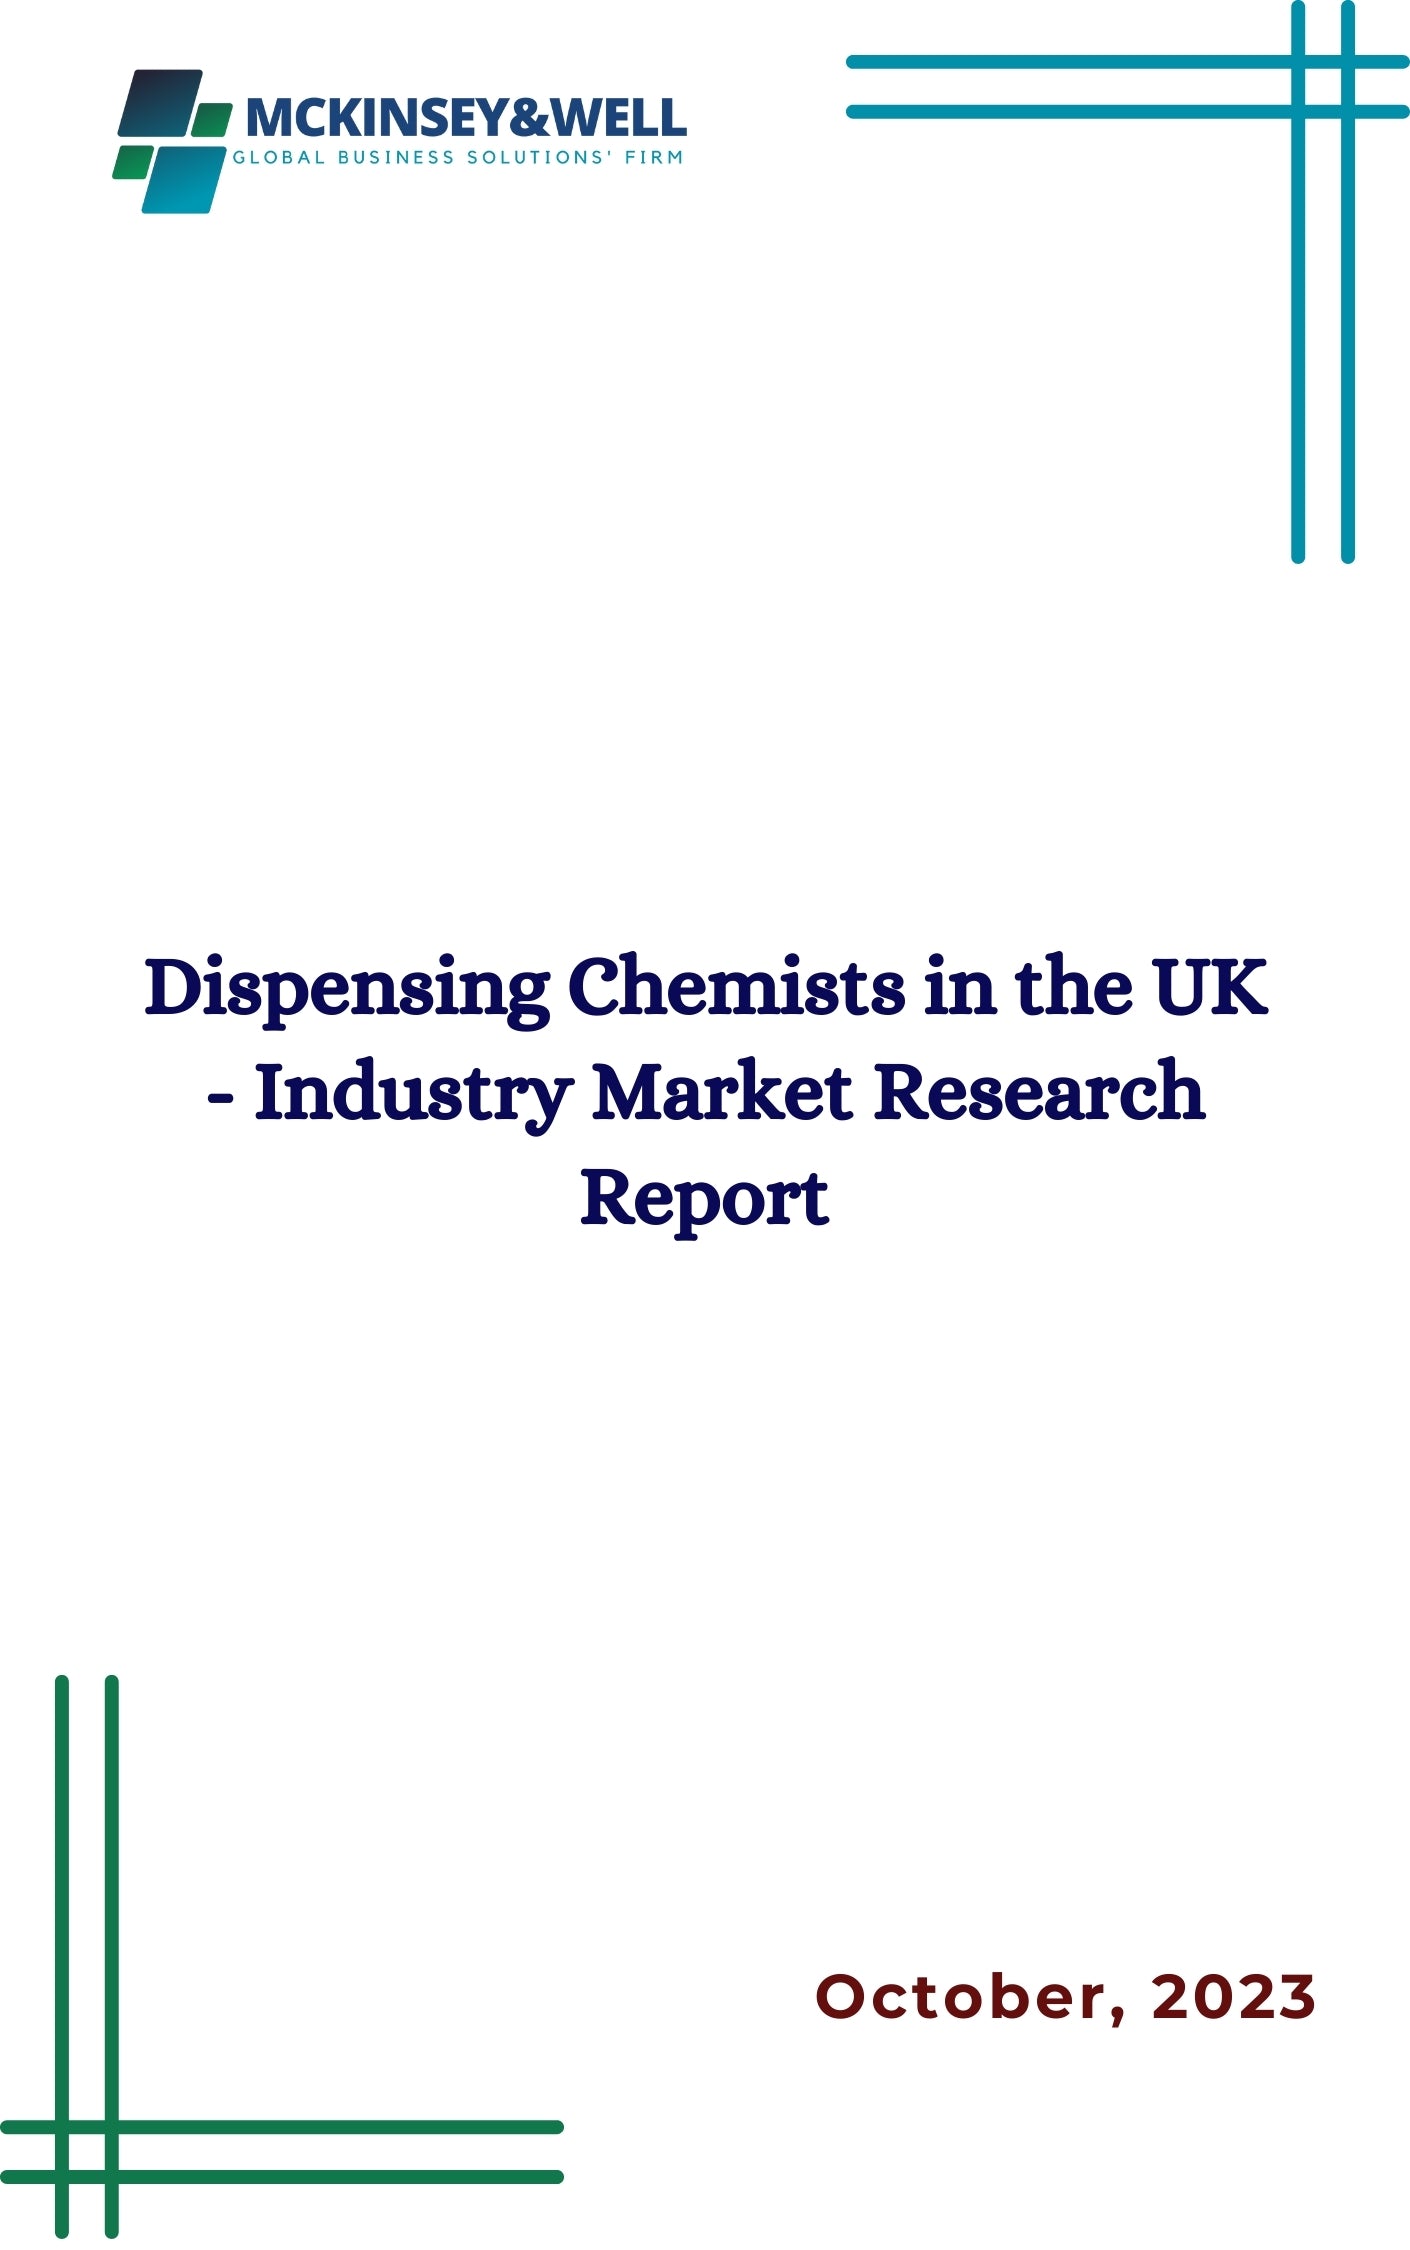 Dispensing Chemists in the UK - Industry Market Research Report